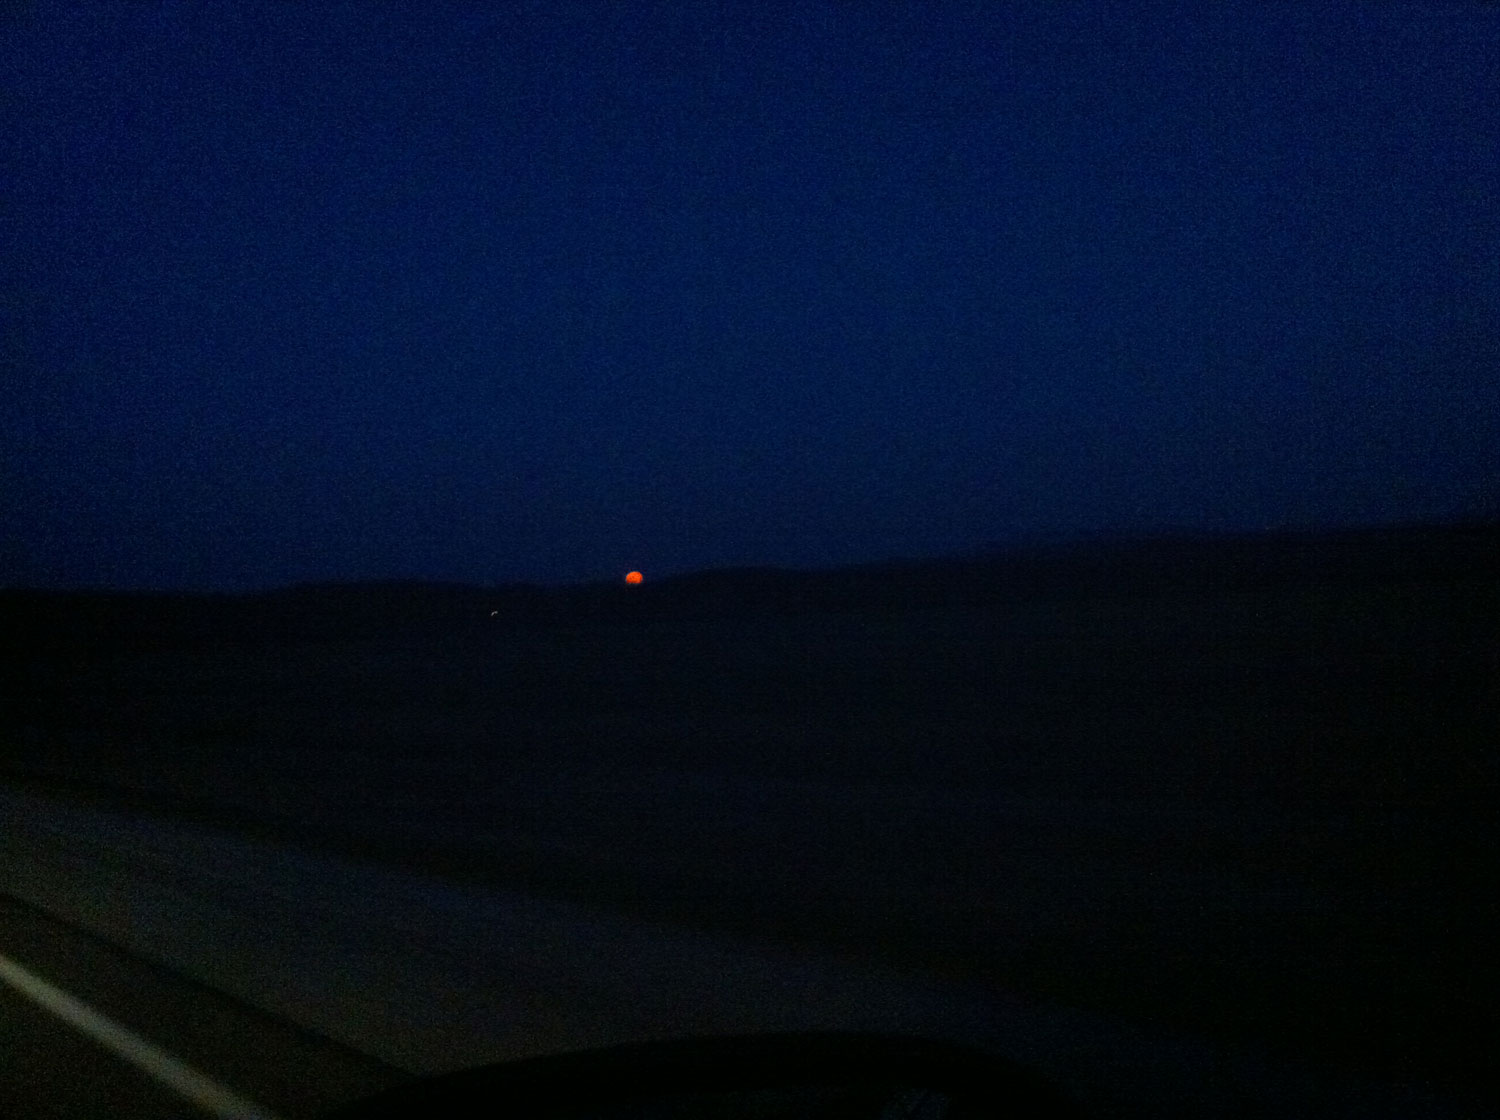 Here is the red moon rising - it looked much bigger in person!